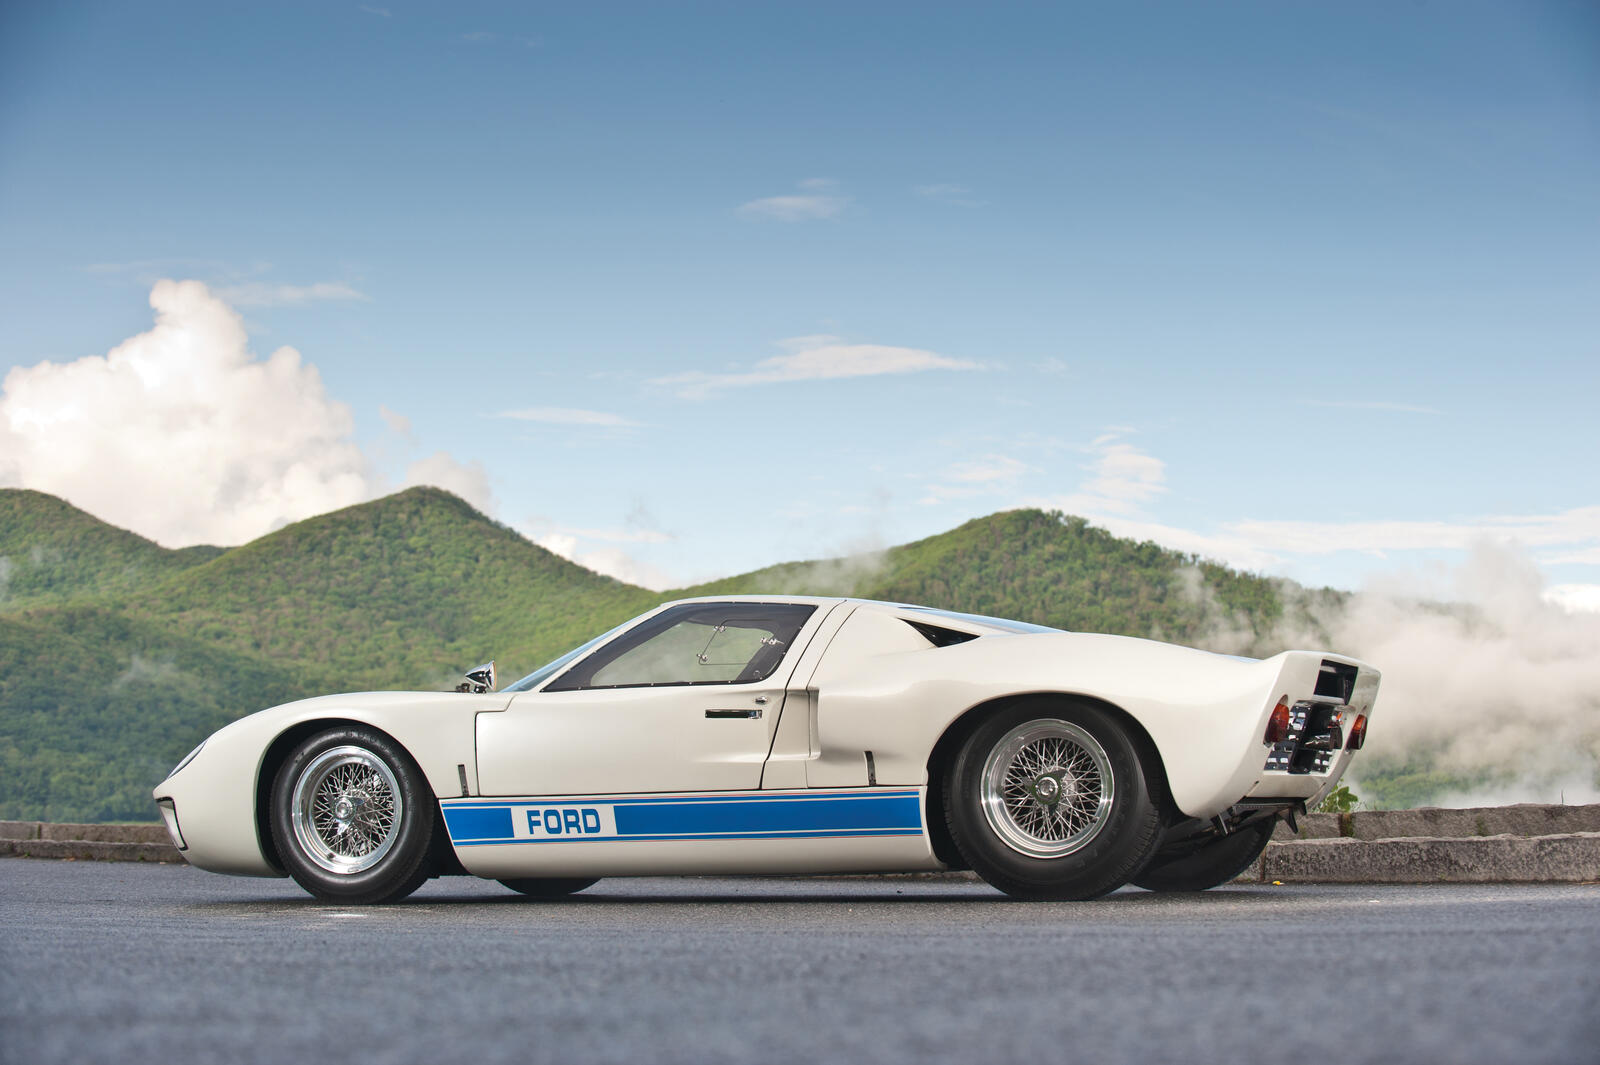 Free photo A white Ford Gt40